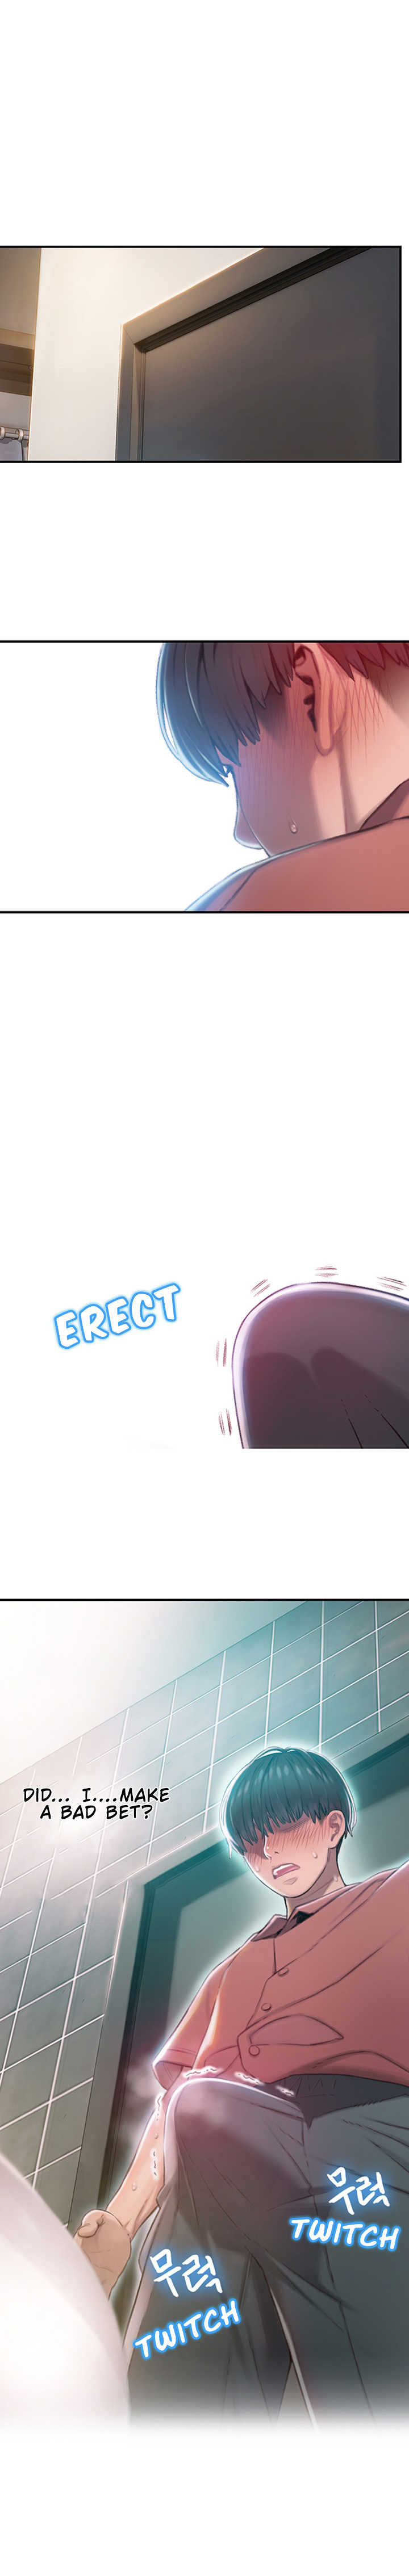 [Park Hyeongjun] Love Limit Exceeded V.2 (01-09) (Ongoing) - Page 5